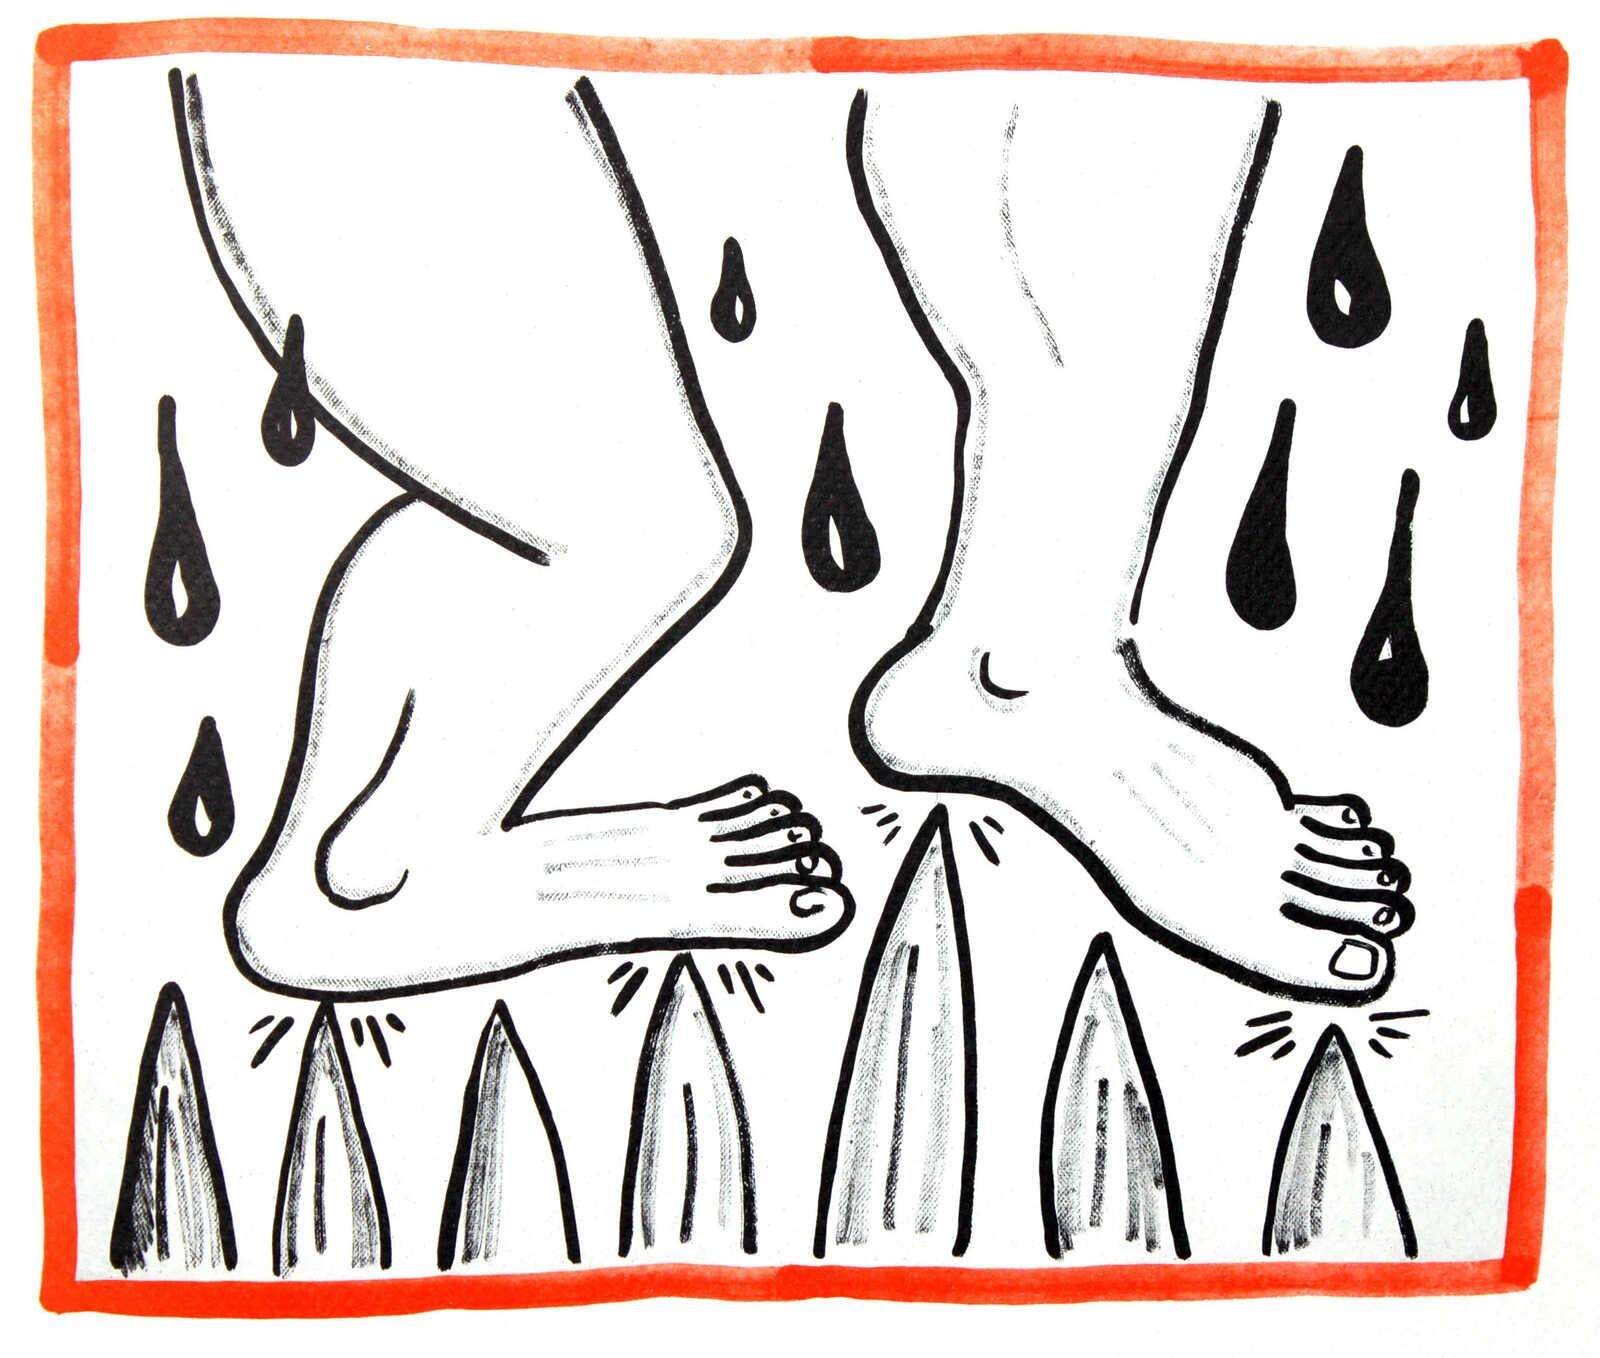 Keith Haring Against All Odds 1990:
Set of six individual lithographs from the 1990 Keith Haring artist book: Against All Odds. 

Medium: Offset lithograph in colors on thick Rivoli paper.
Dimensions: 8.5 x 10.25 inches (applies to each